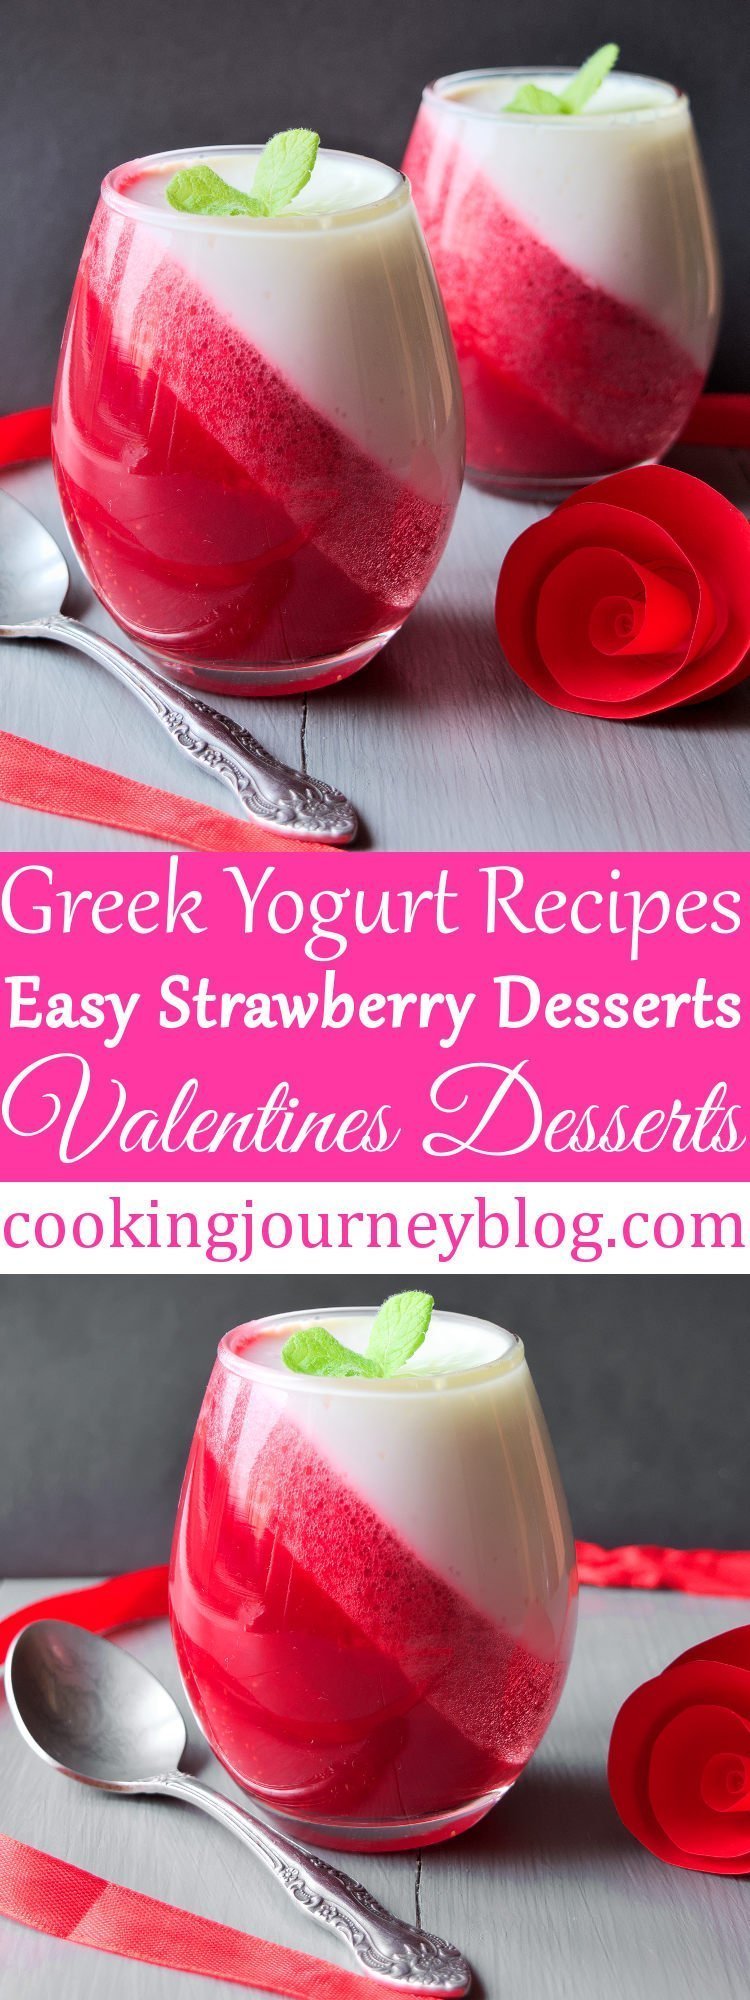 Easy strawberry desserts with magic, perfect valentine treats! I bet this is a cold dessert that you will want to make again. This dessert for two is one of healthy strawberry recipes to make for Valentines day or any other occasion or even for breakfast! Cooking Journey Blog